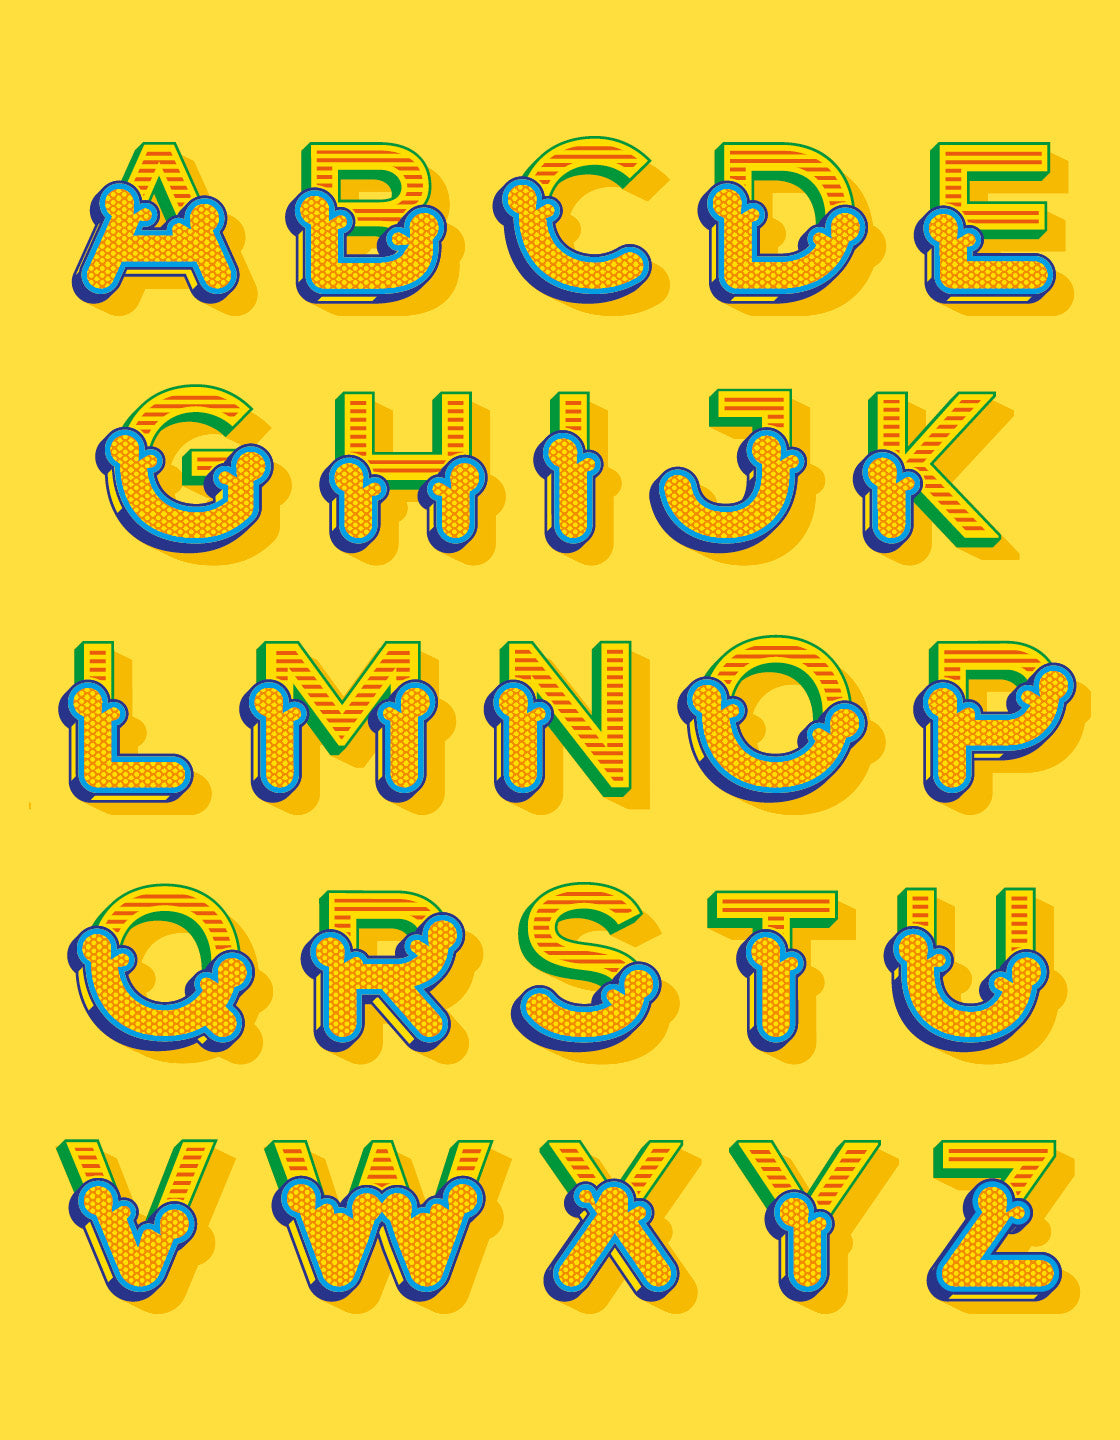 Yellow backdrop featuring the full alphabet in the circus font